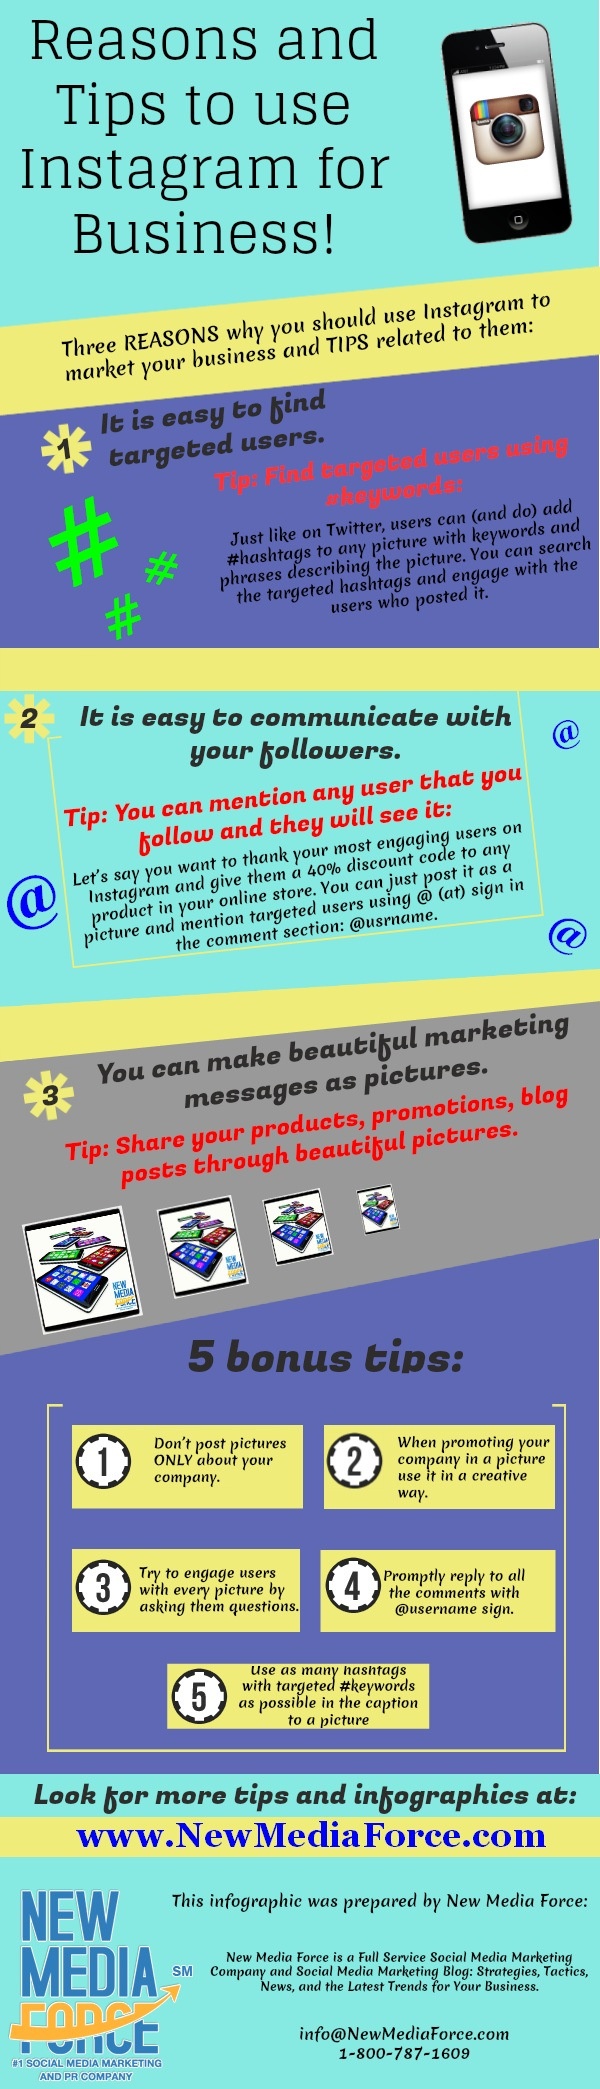 Reasons and Tips to use Instagram for Business!